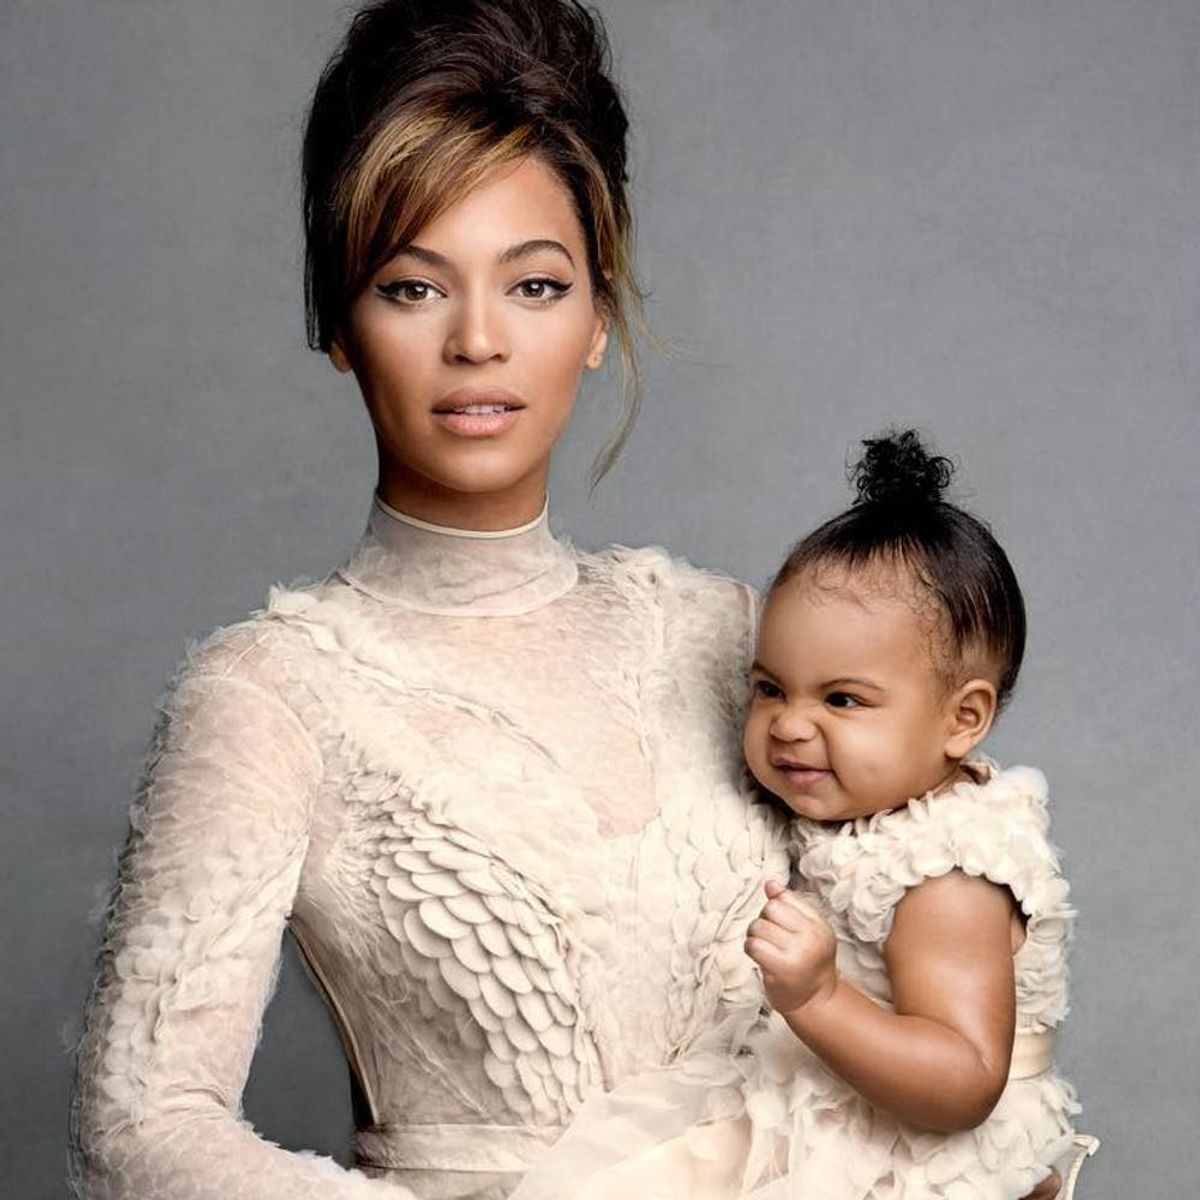 This Study Shows That Beyoncé Helped Name a Bunch of Children